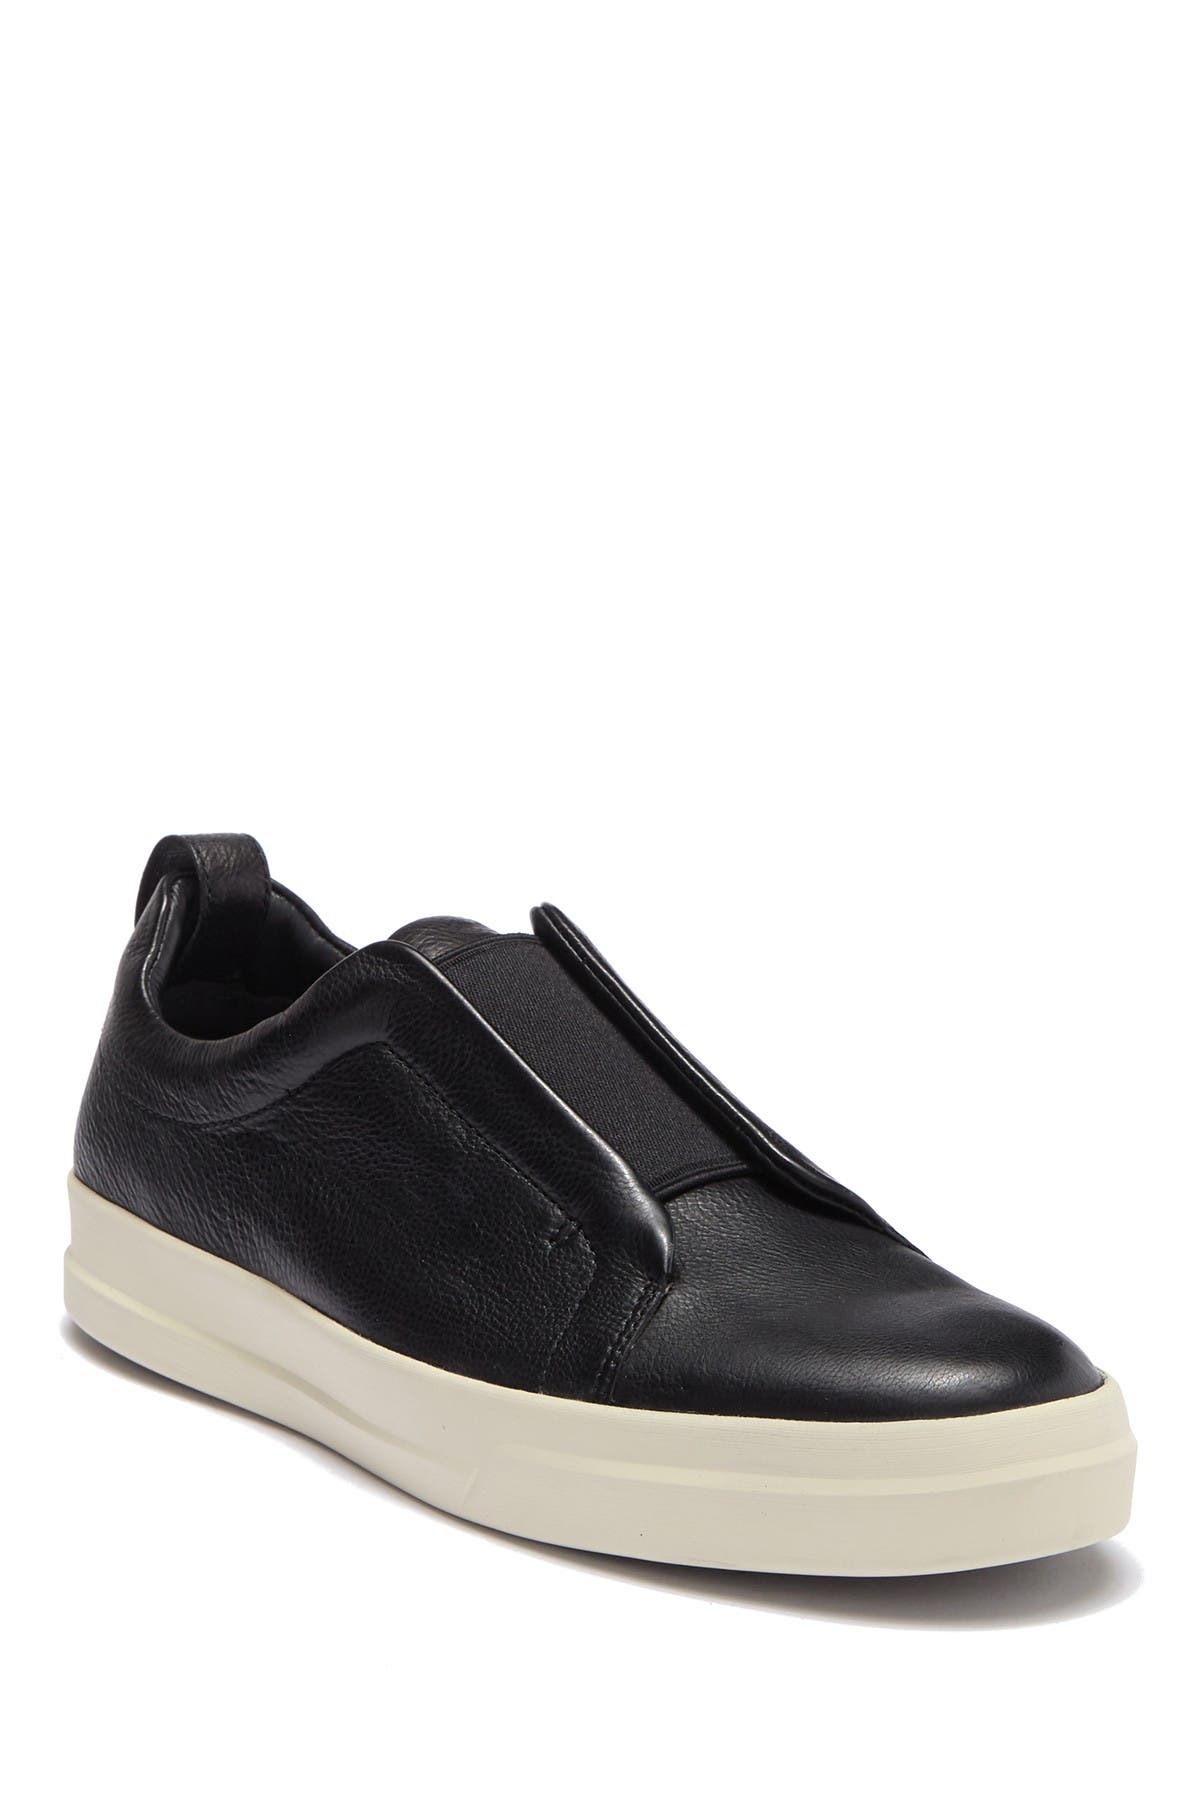 Vince | Conway Leather Slip-On Sneaker 